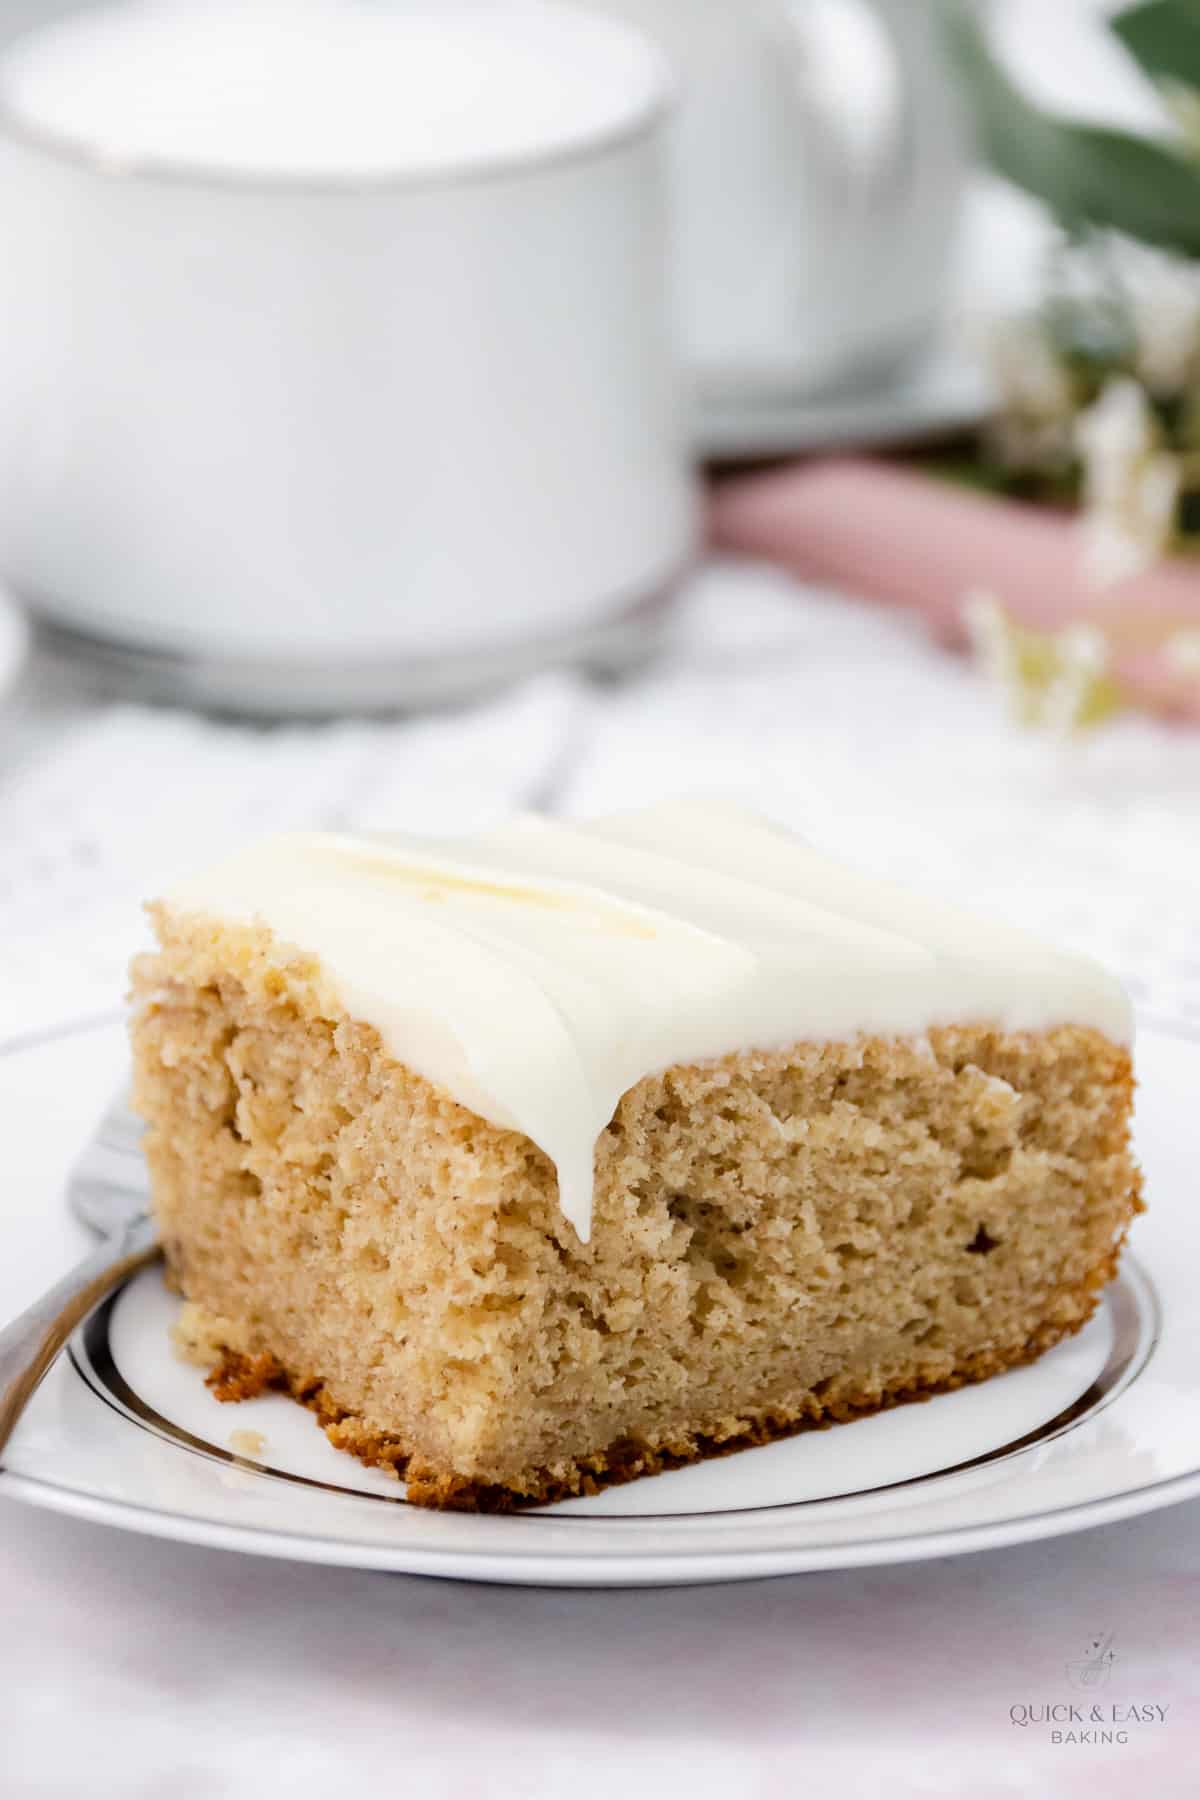 Close up image of banana cake with icing on a white plate and a fork.